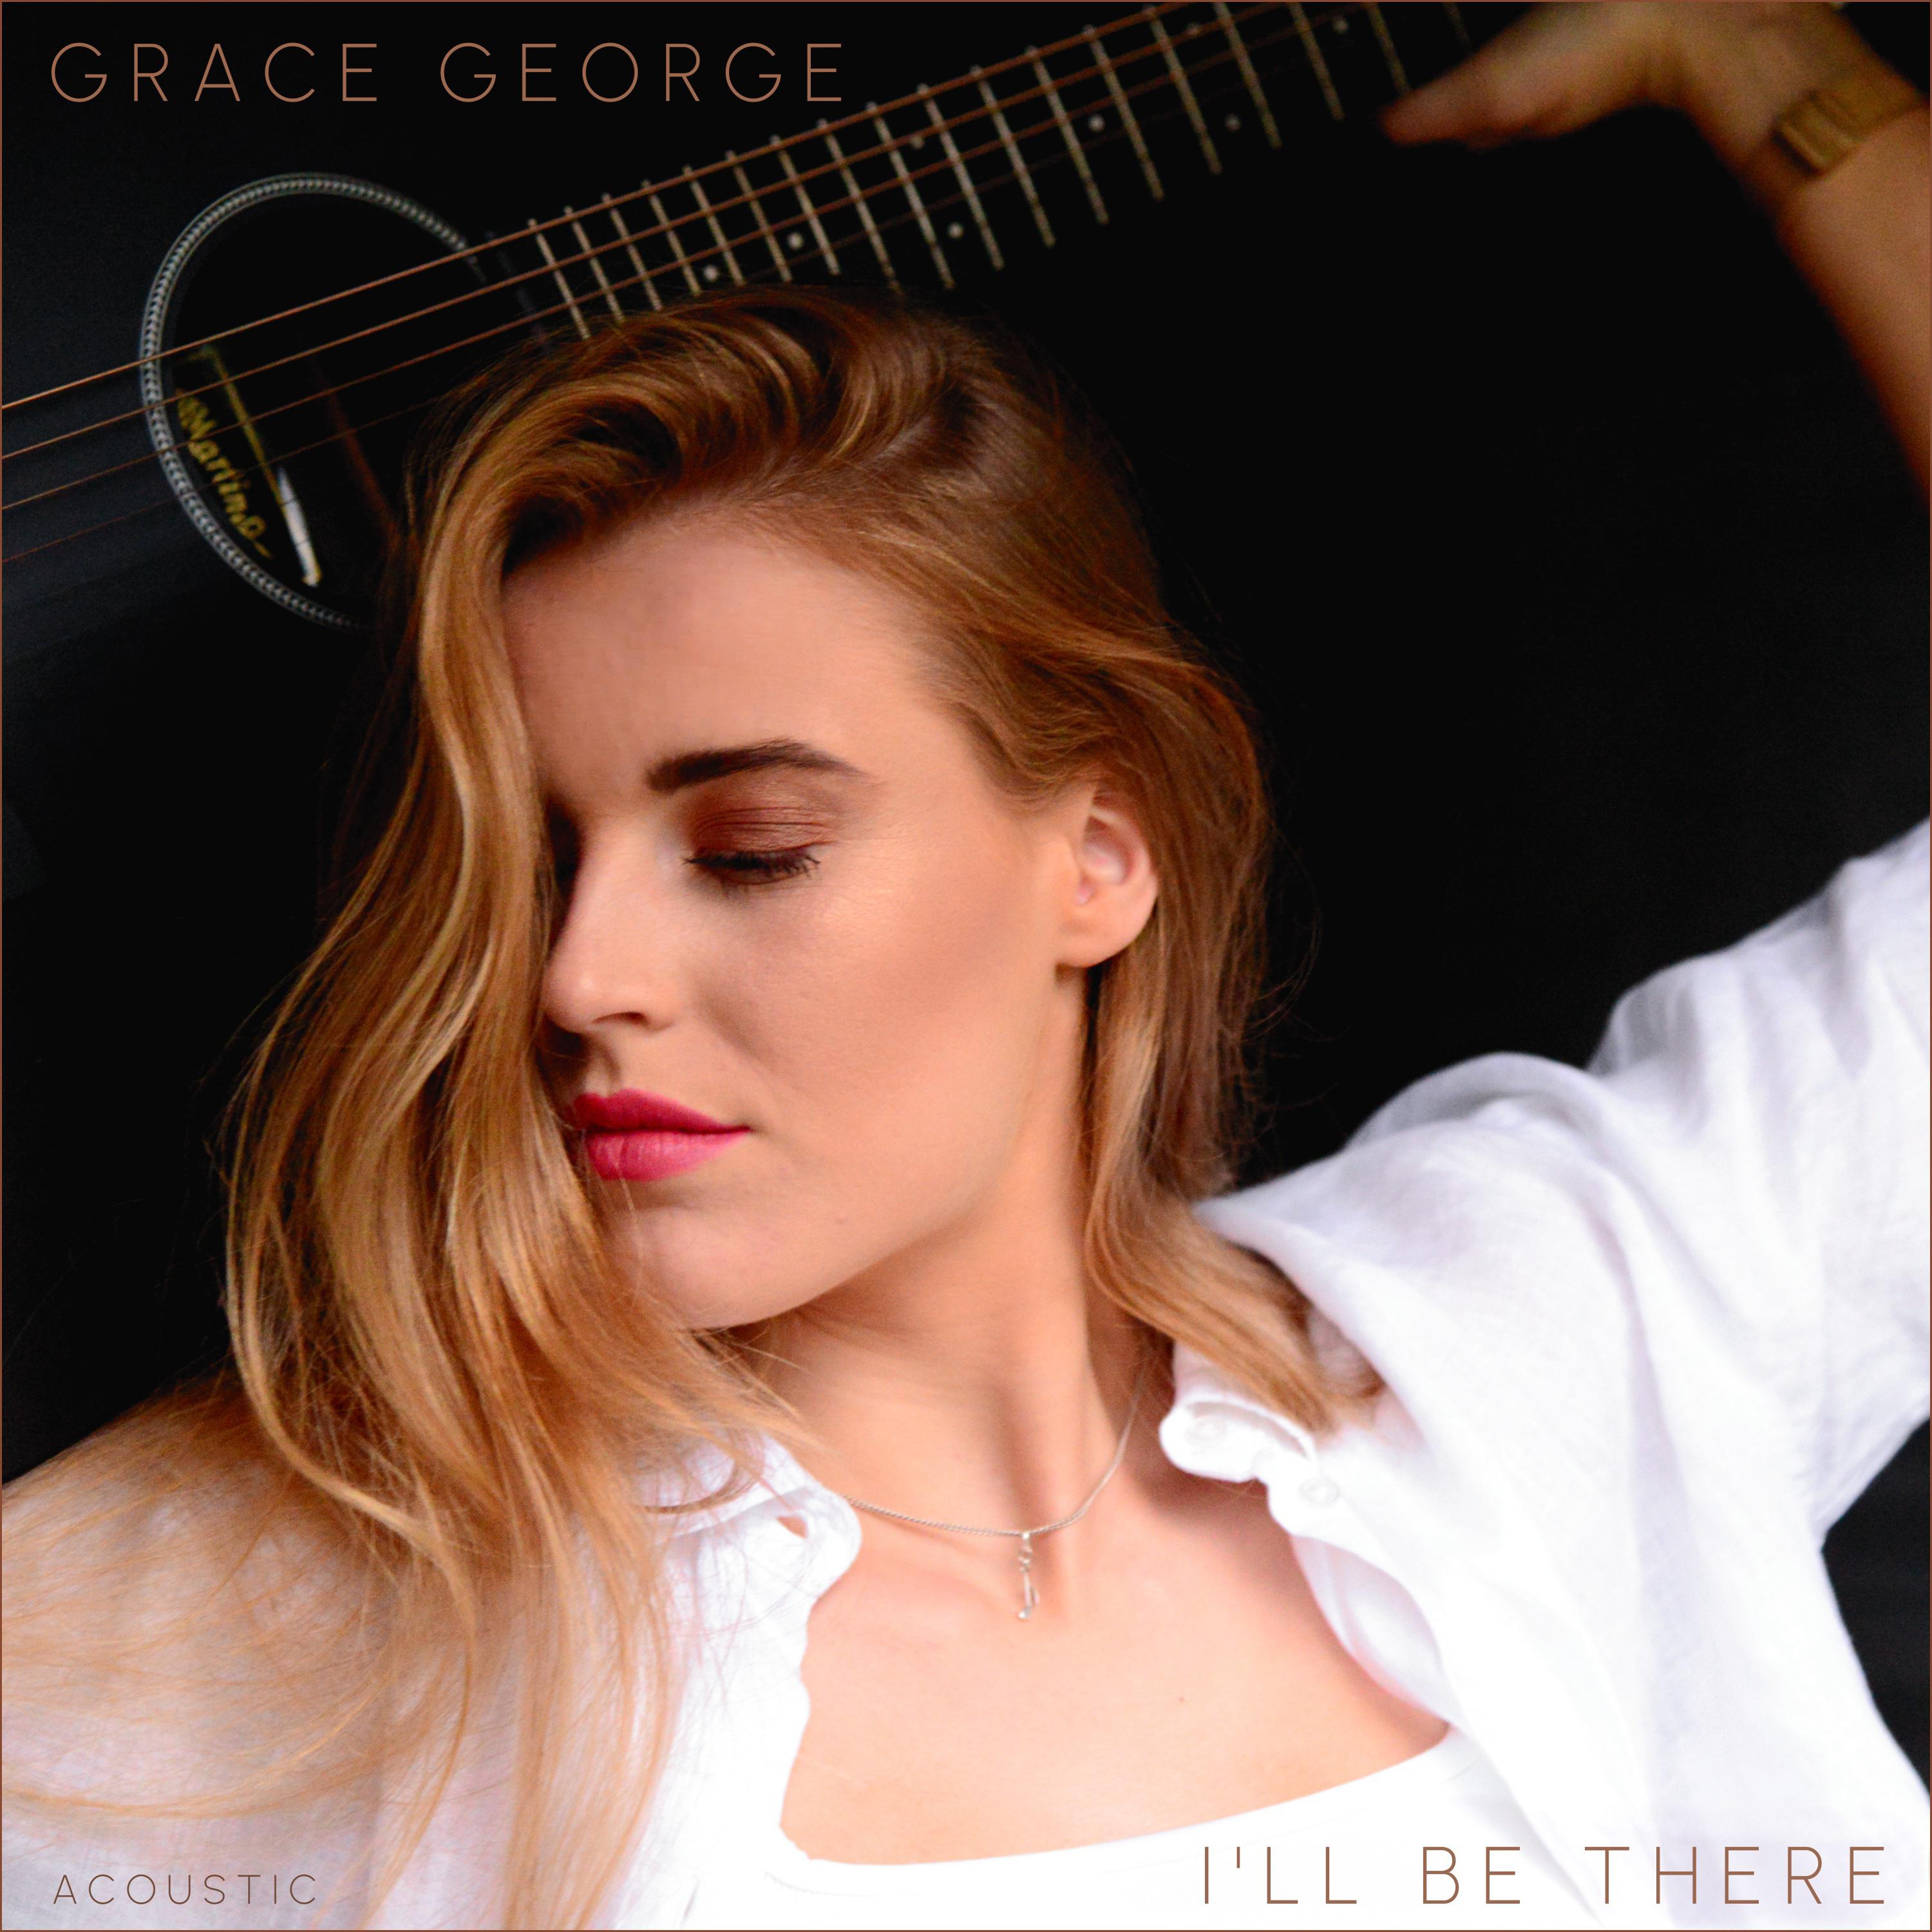 Grace George - I'll Be There (Acoustic)